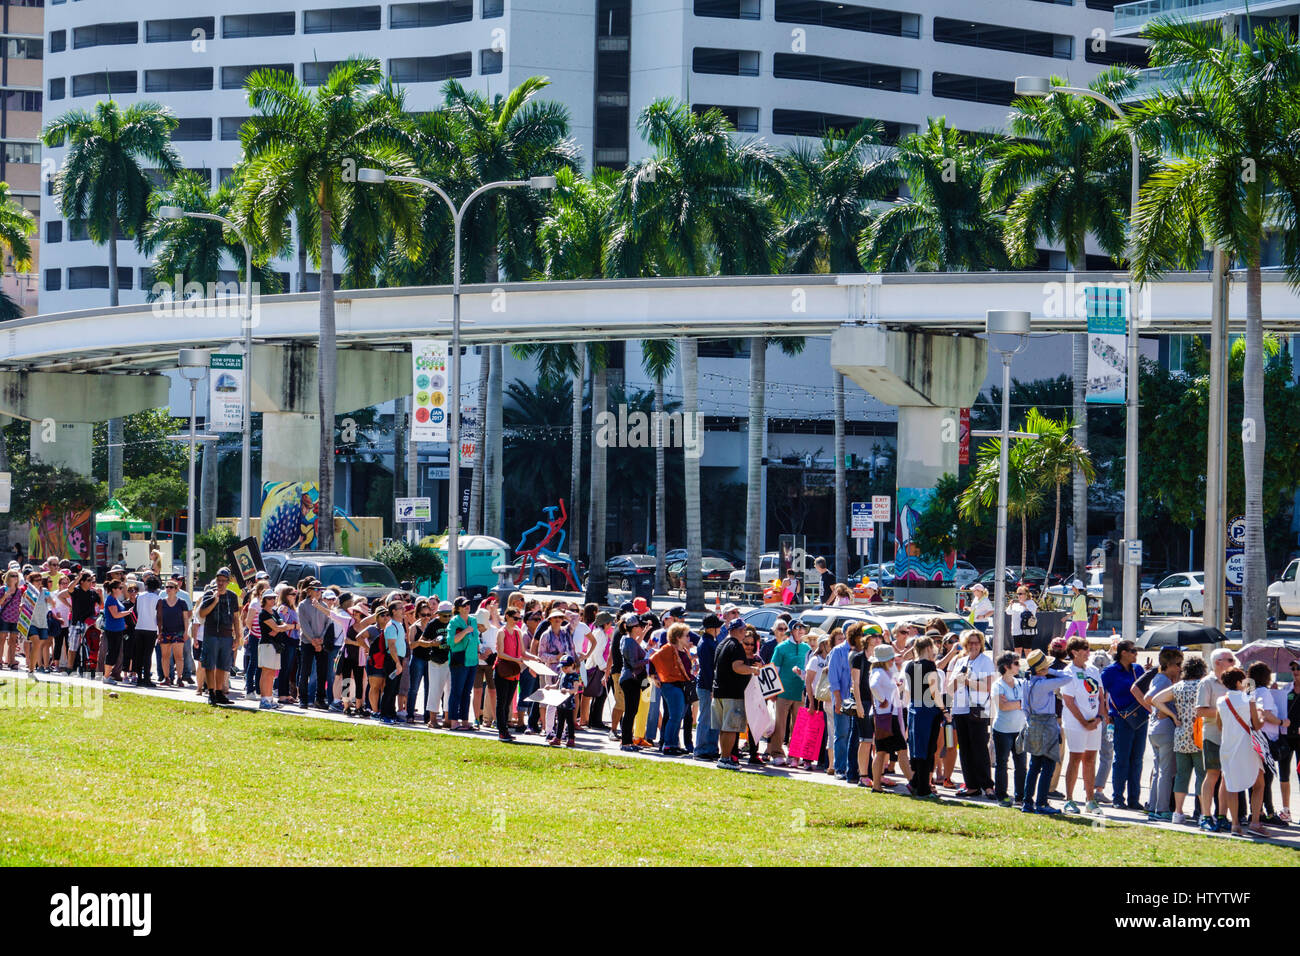 Miami Florida,Downtown,Bayfront Park,Women's March,political protest,march,human rights,advocacy,line,queue,protesters,FL170122021 Stock Photo